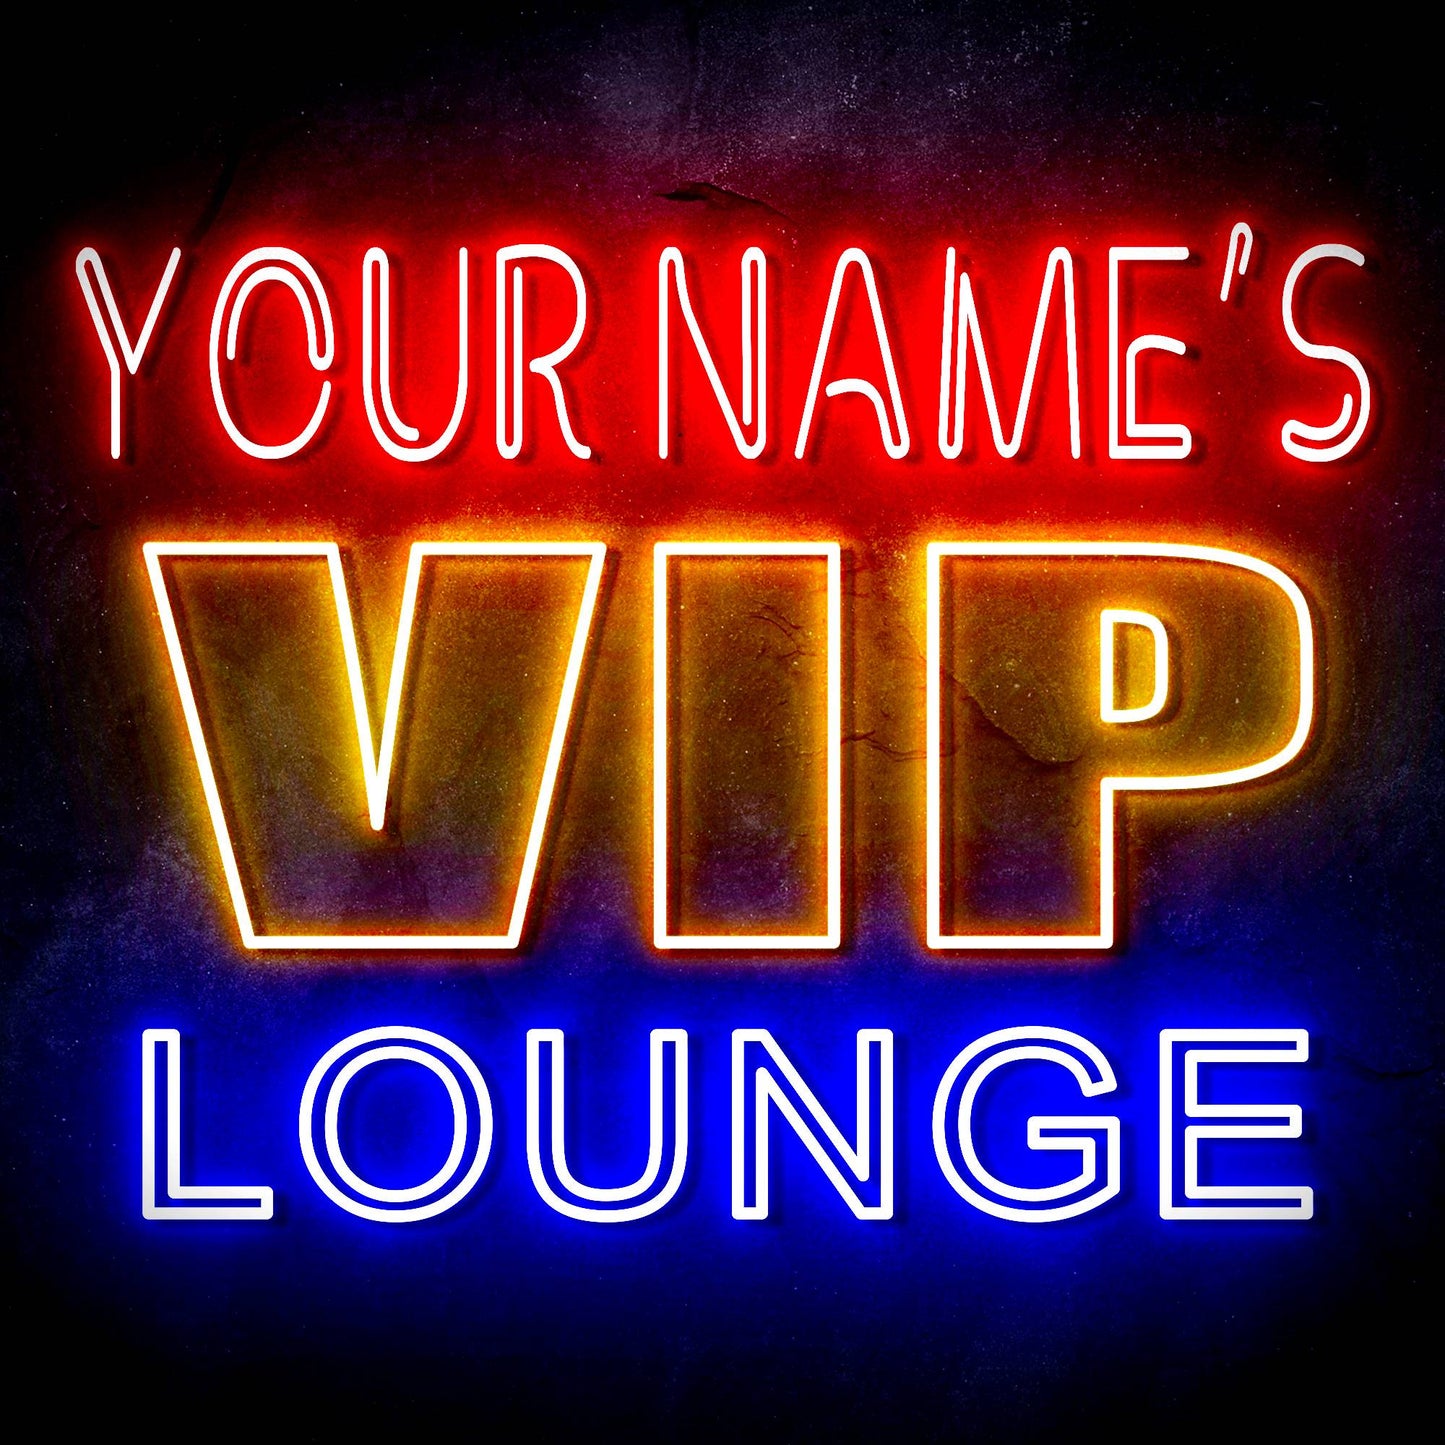 Personalized Ultra-Bright VIP Lounge LED Neon Sign - Way Up Gifts